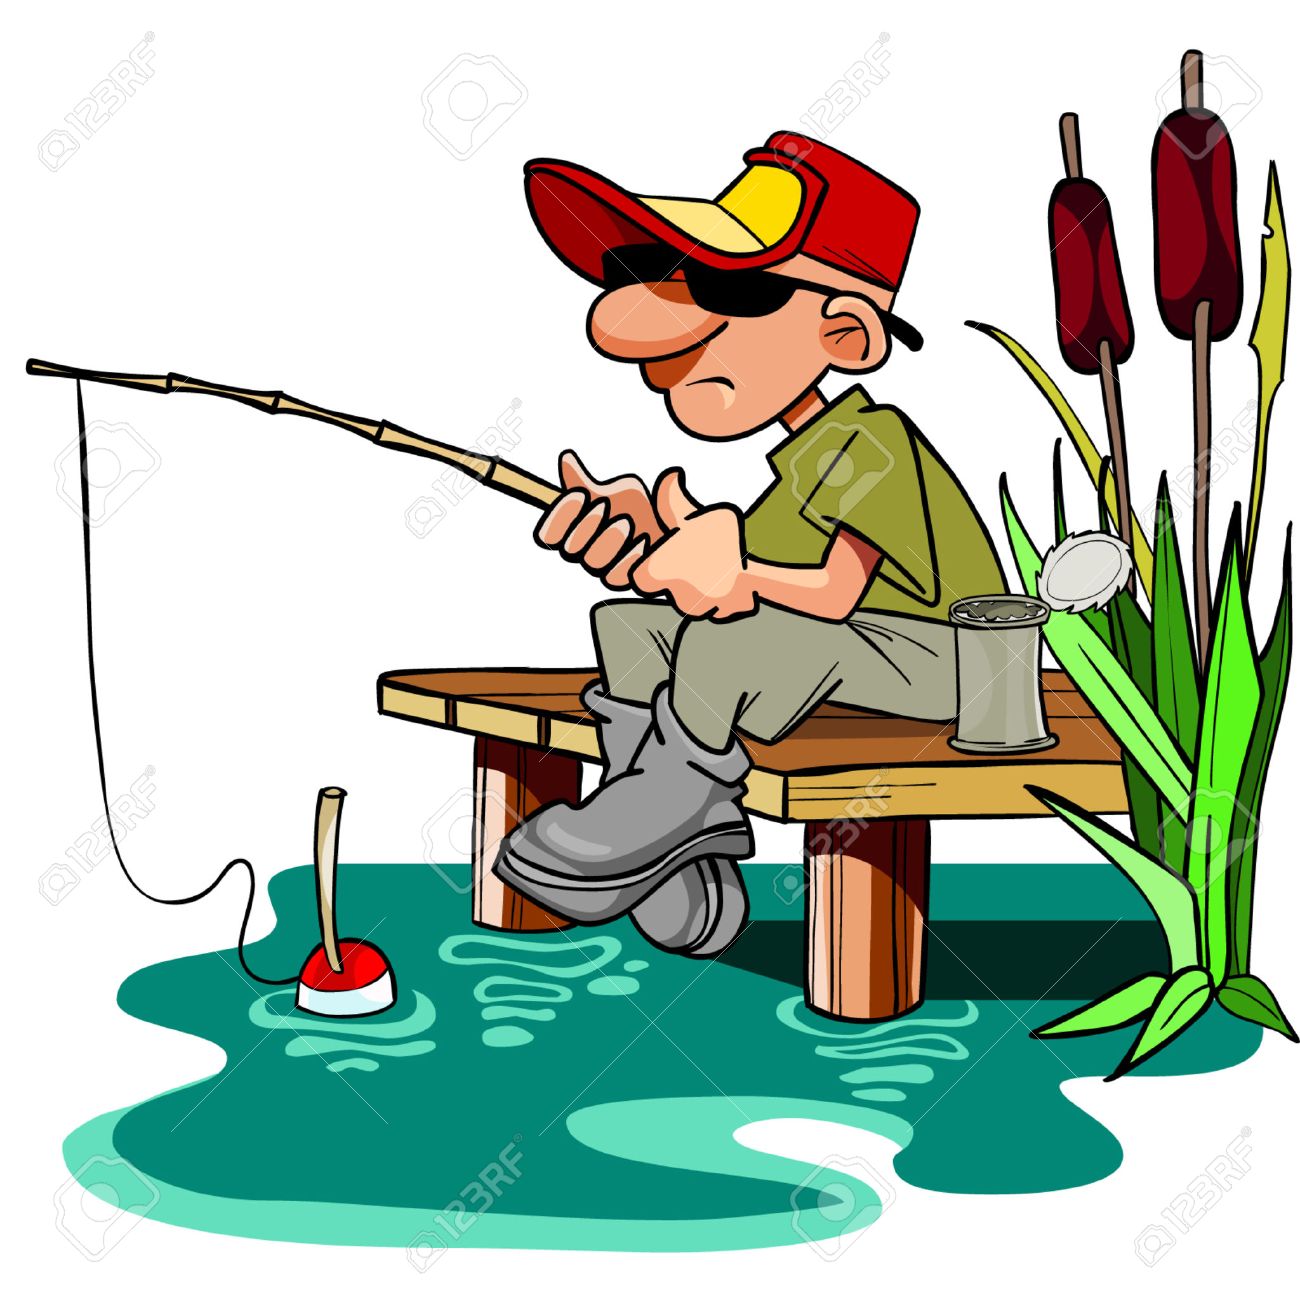 cartoon fisherman with a fishing pole sitting on the dais